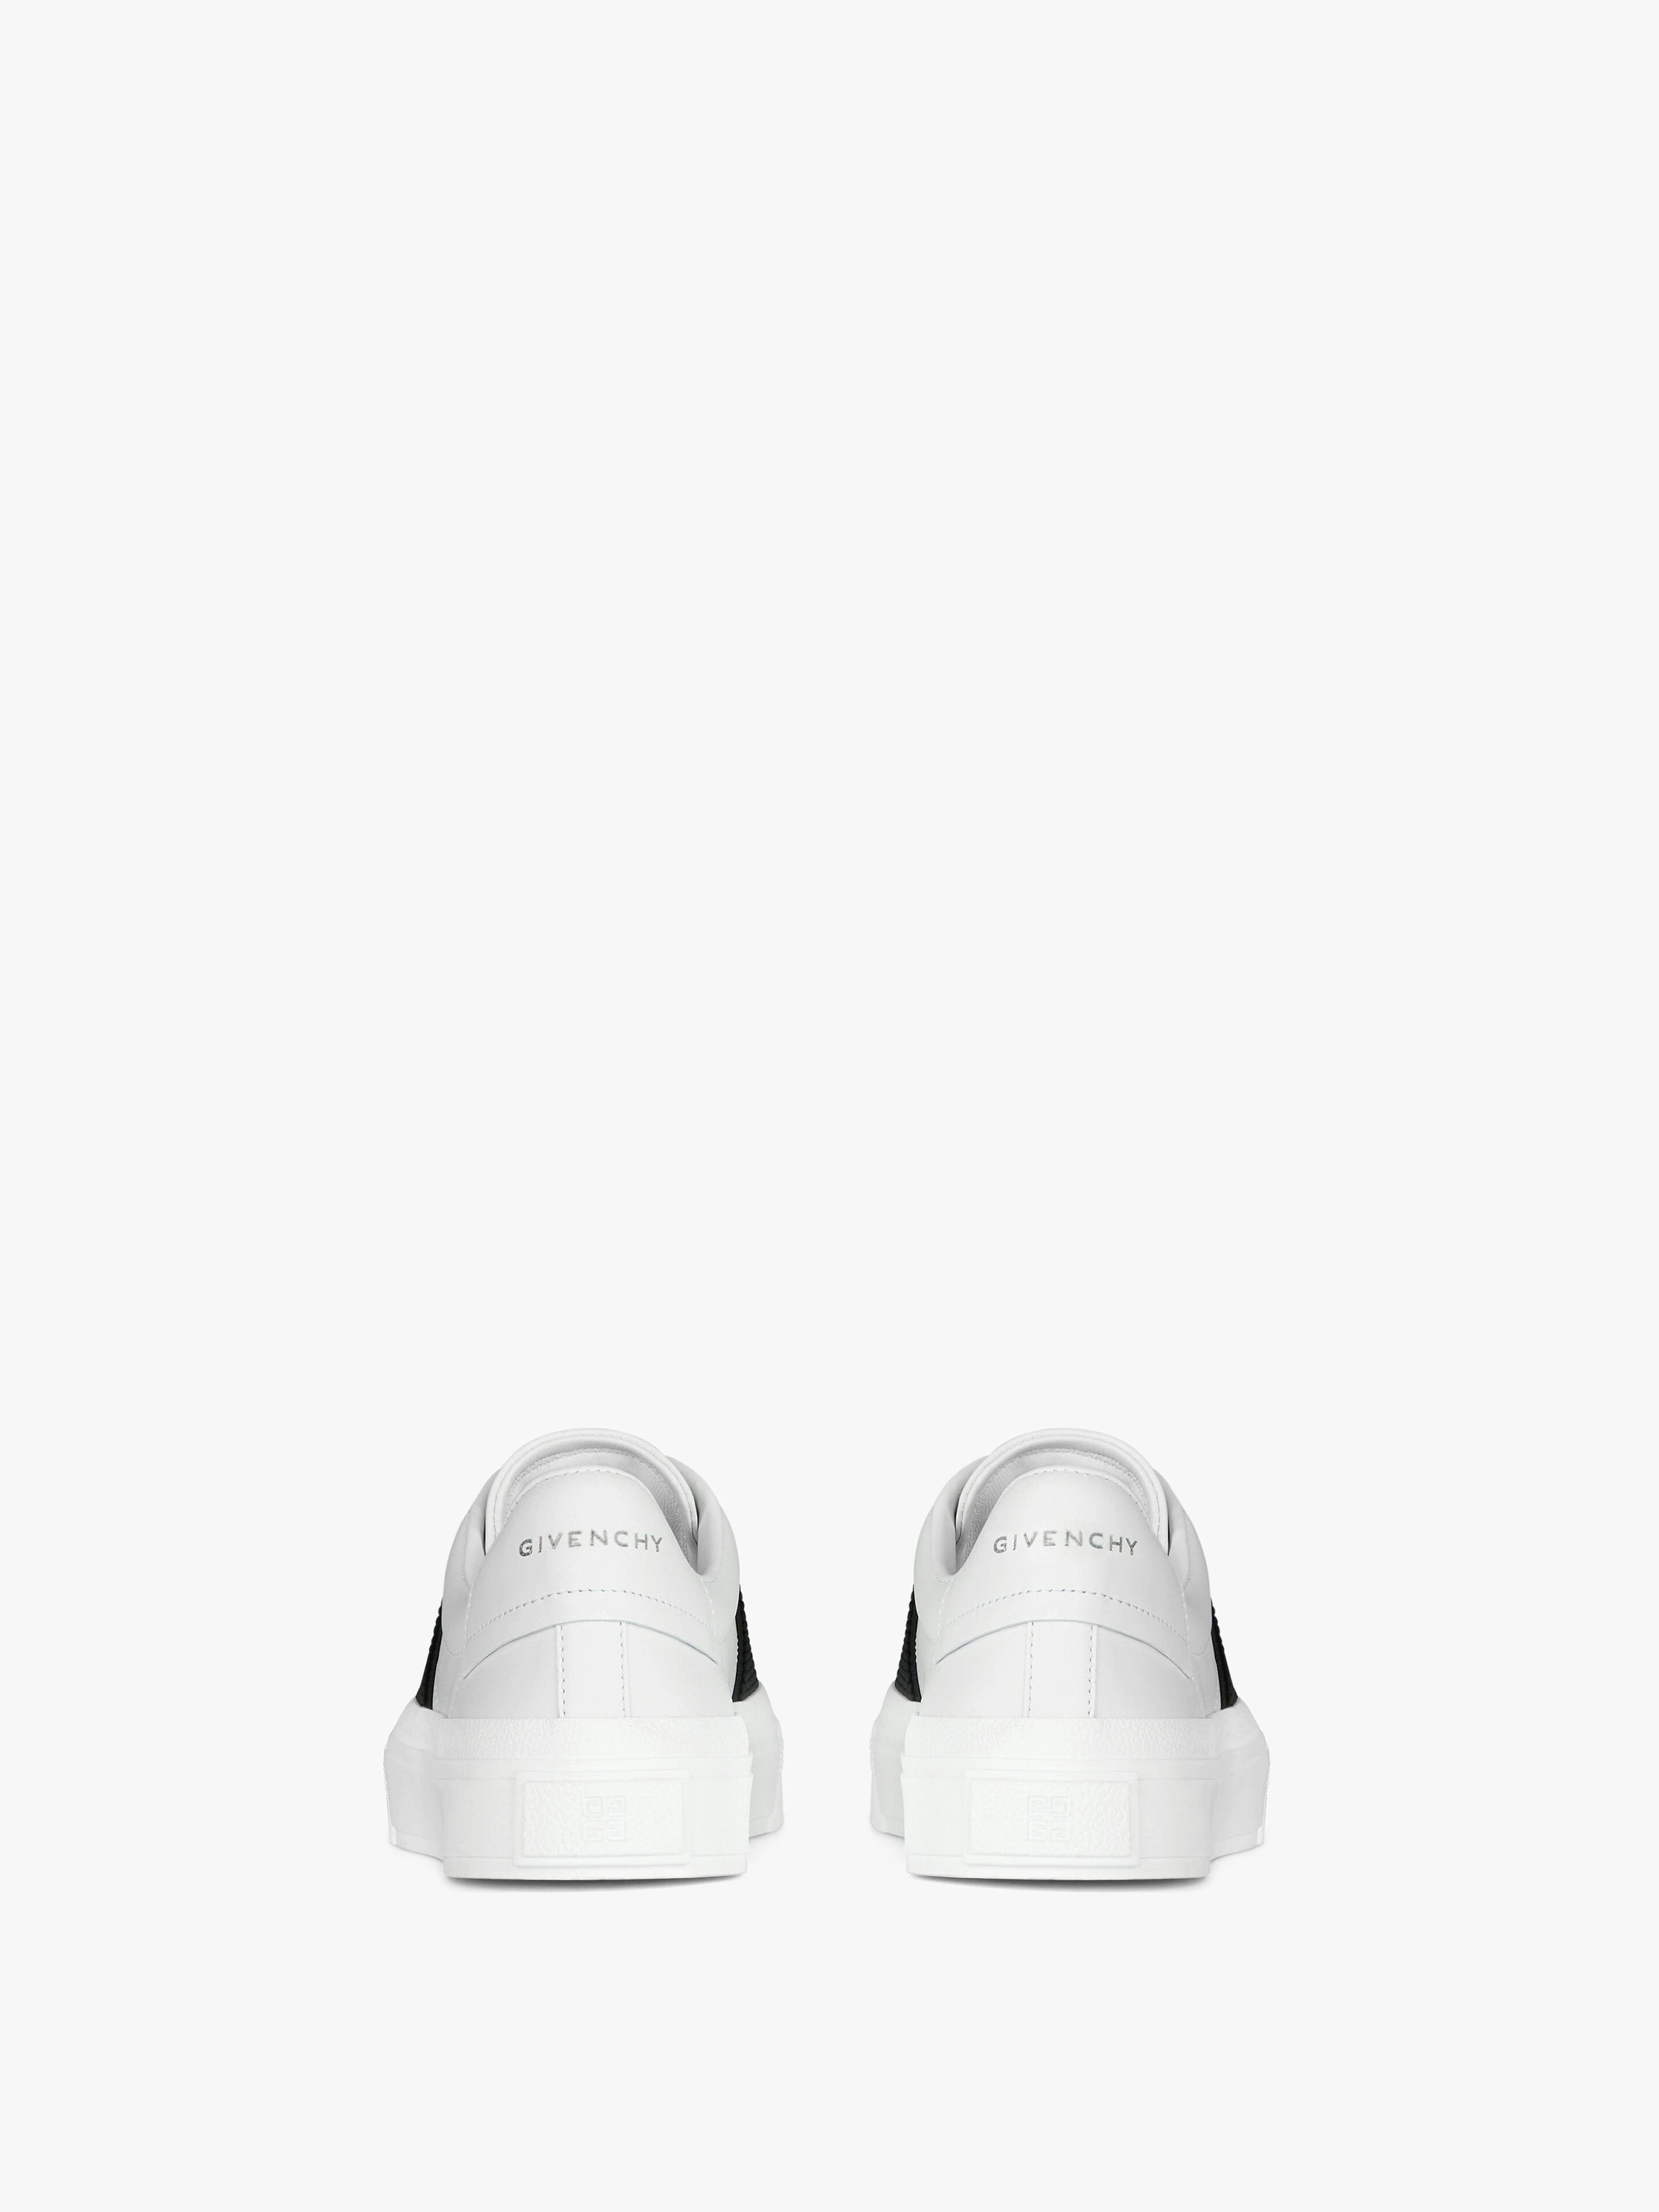 CITY SPORT SNEAKERS IN LEATHER WITH GIVENCHY STRAP - 7